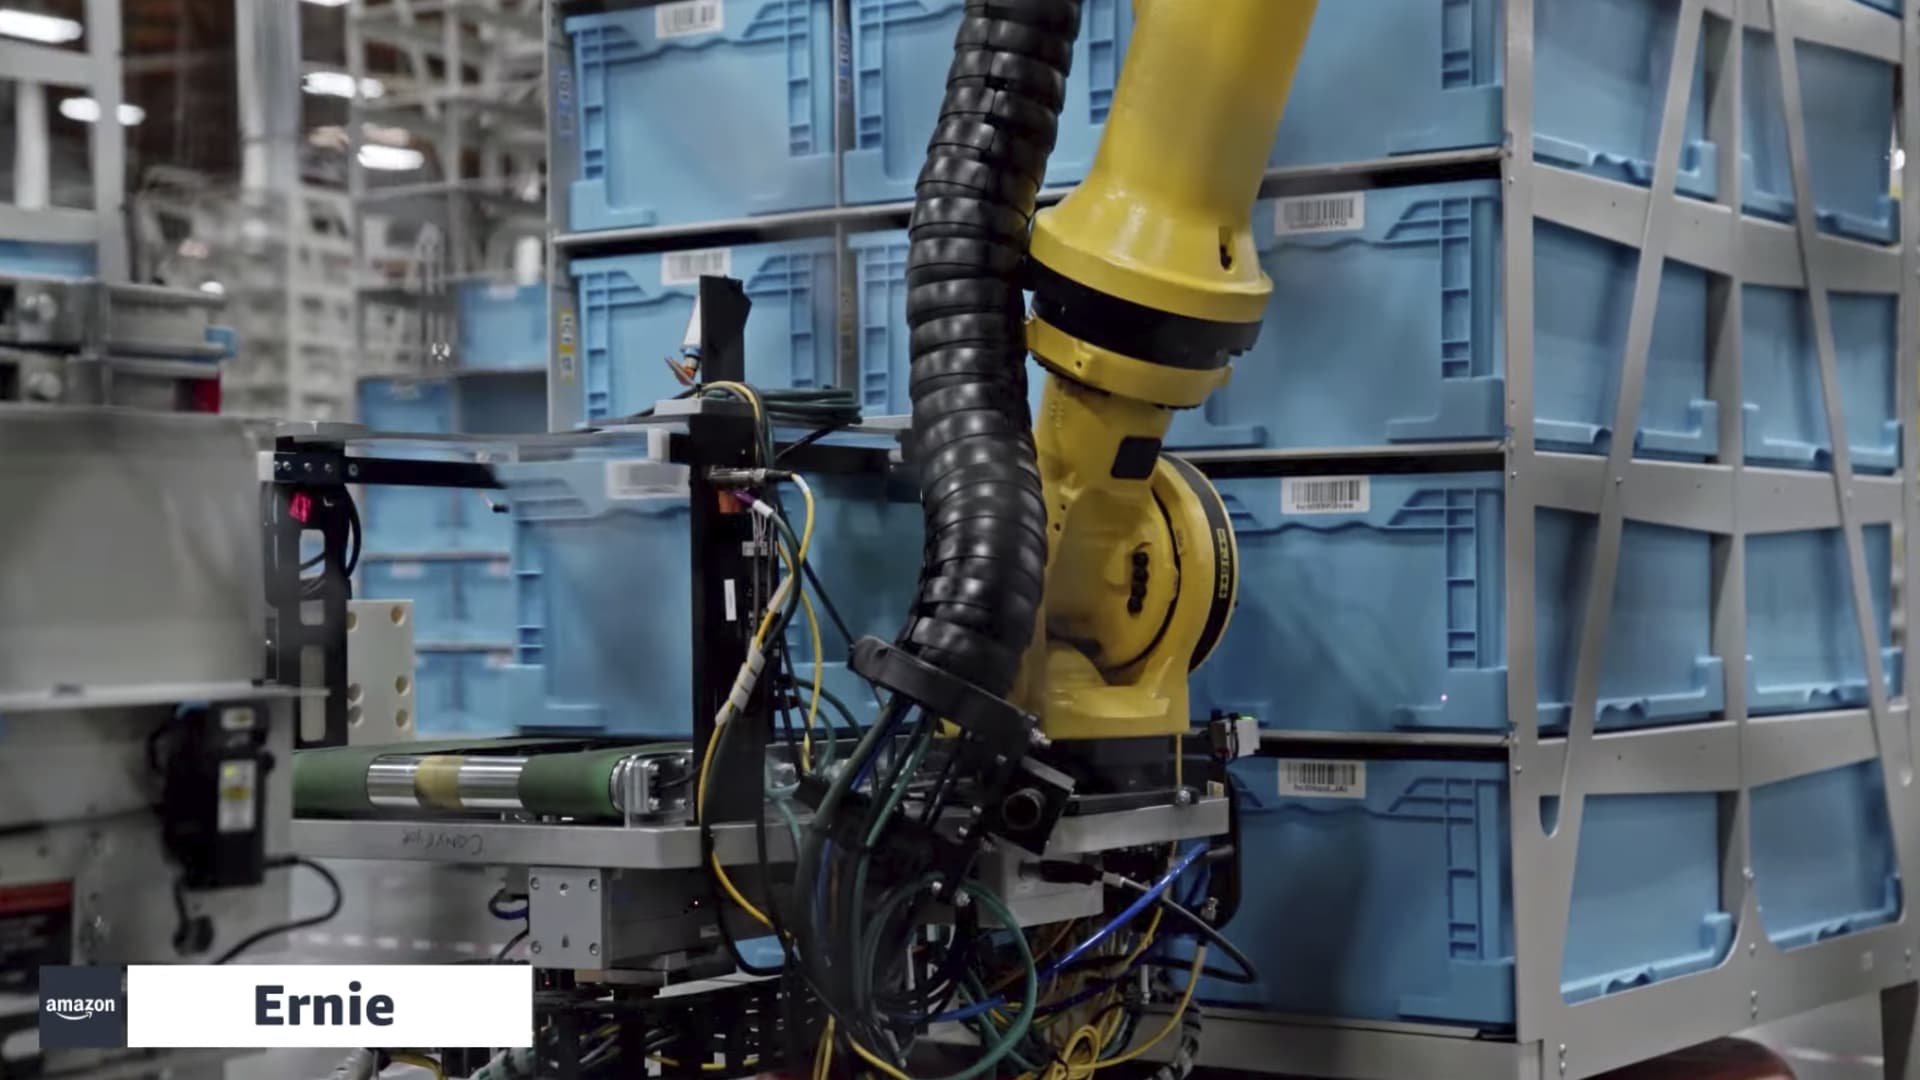 Amazon introduces new robots named Bert and Ernie to fulfillment center operations.